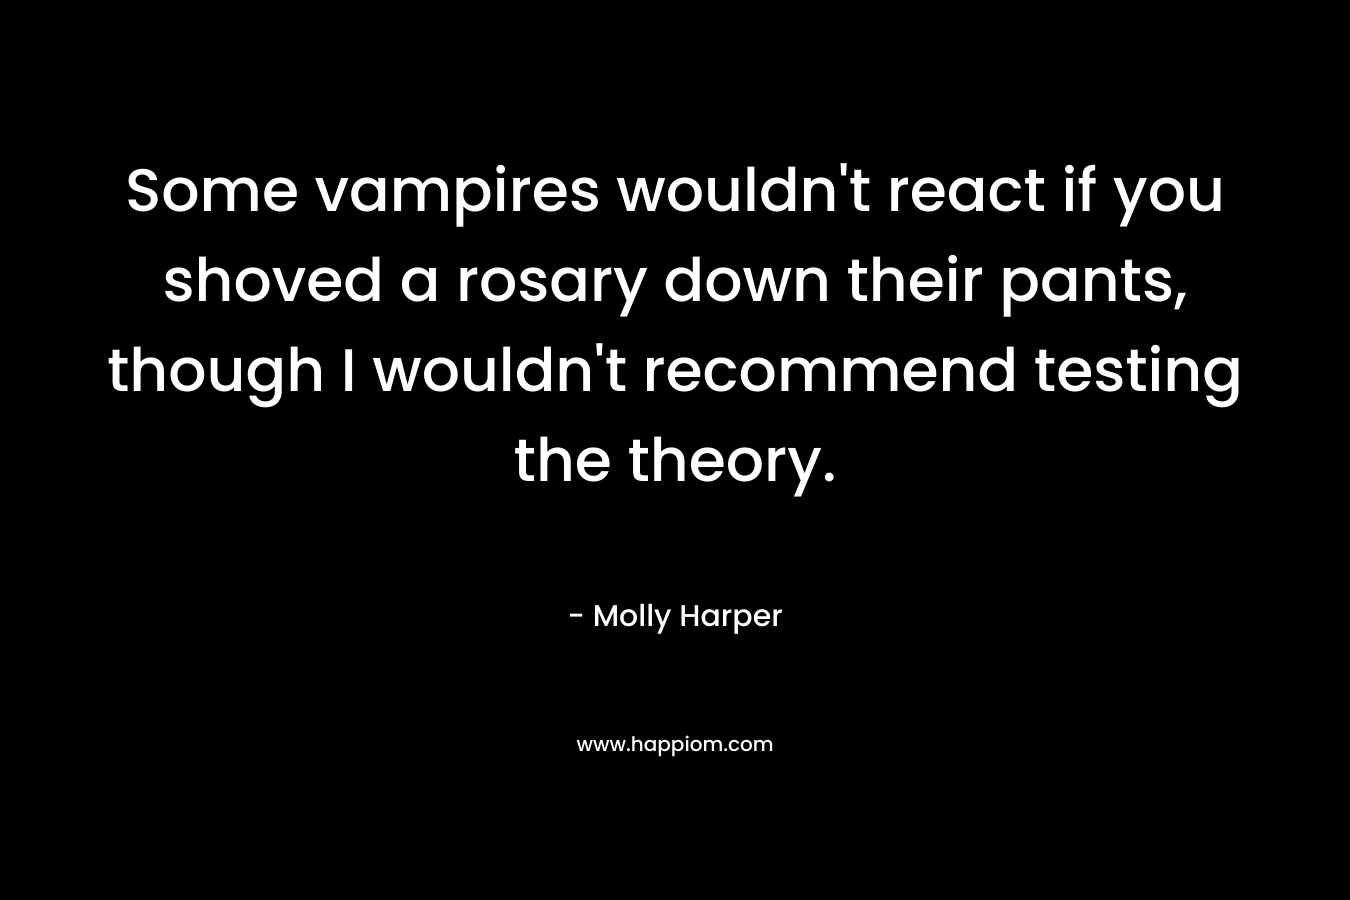 Some vampires wouldn’t react if you shoved a rosary down their pants, though I wouldn’t recommend testing the theory. – Molly Harper